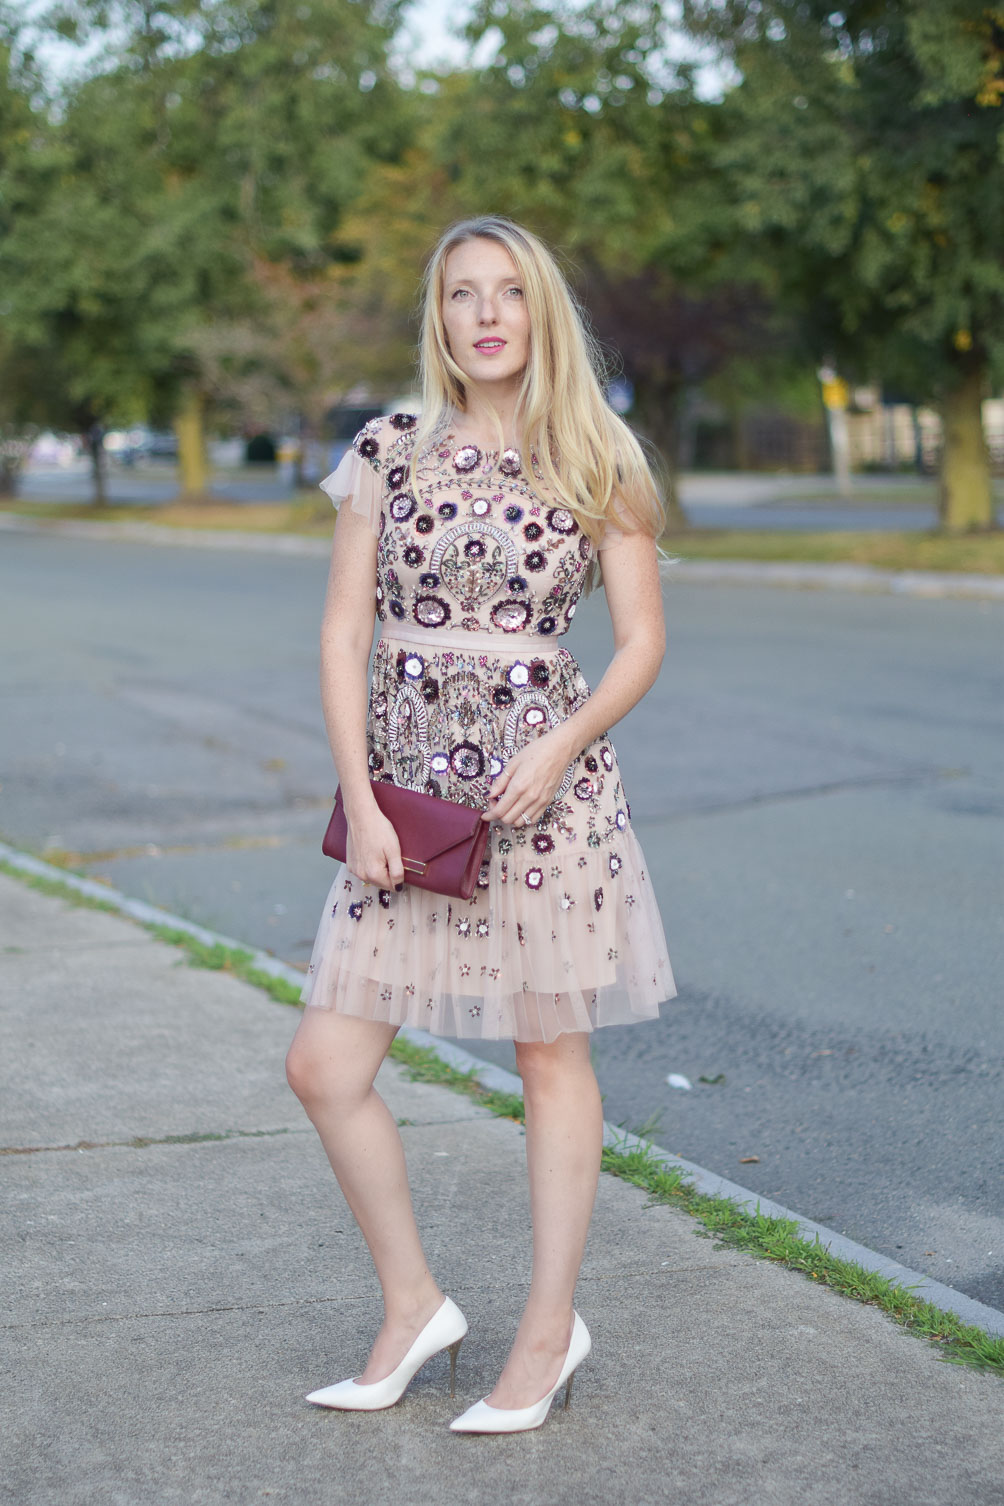 what i wore to the rewardStyle party - Needle & Thread beaded dress from BHLDN on Leslie Musser one brass fox